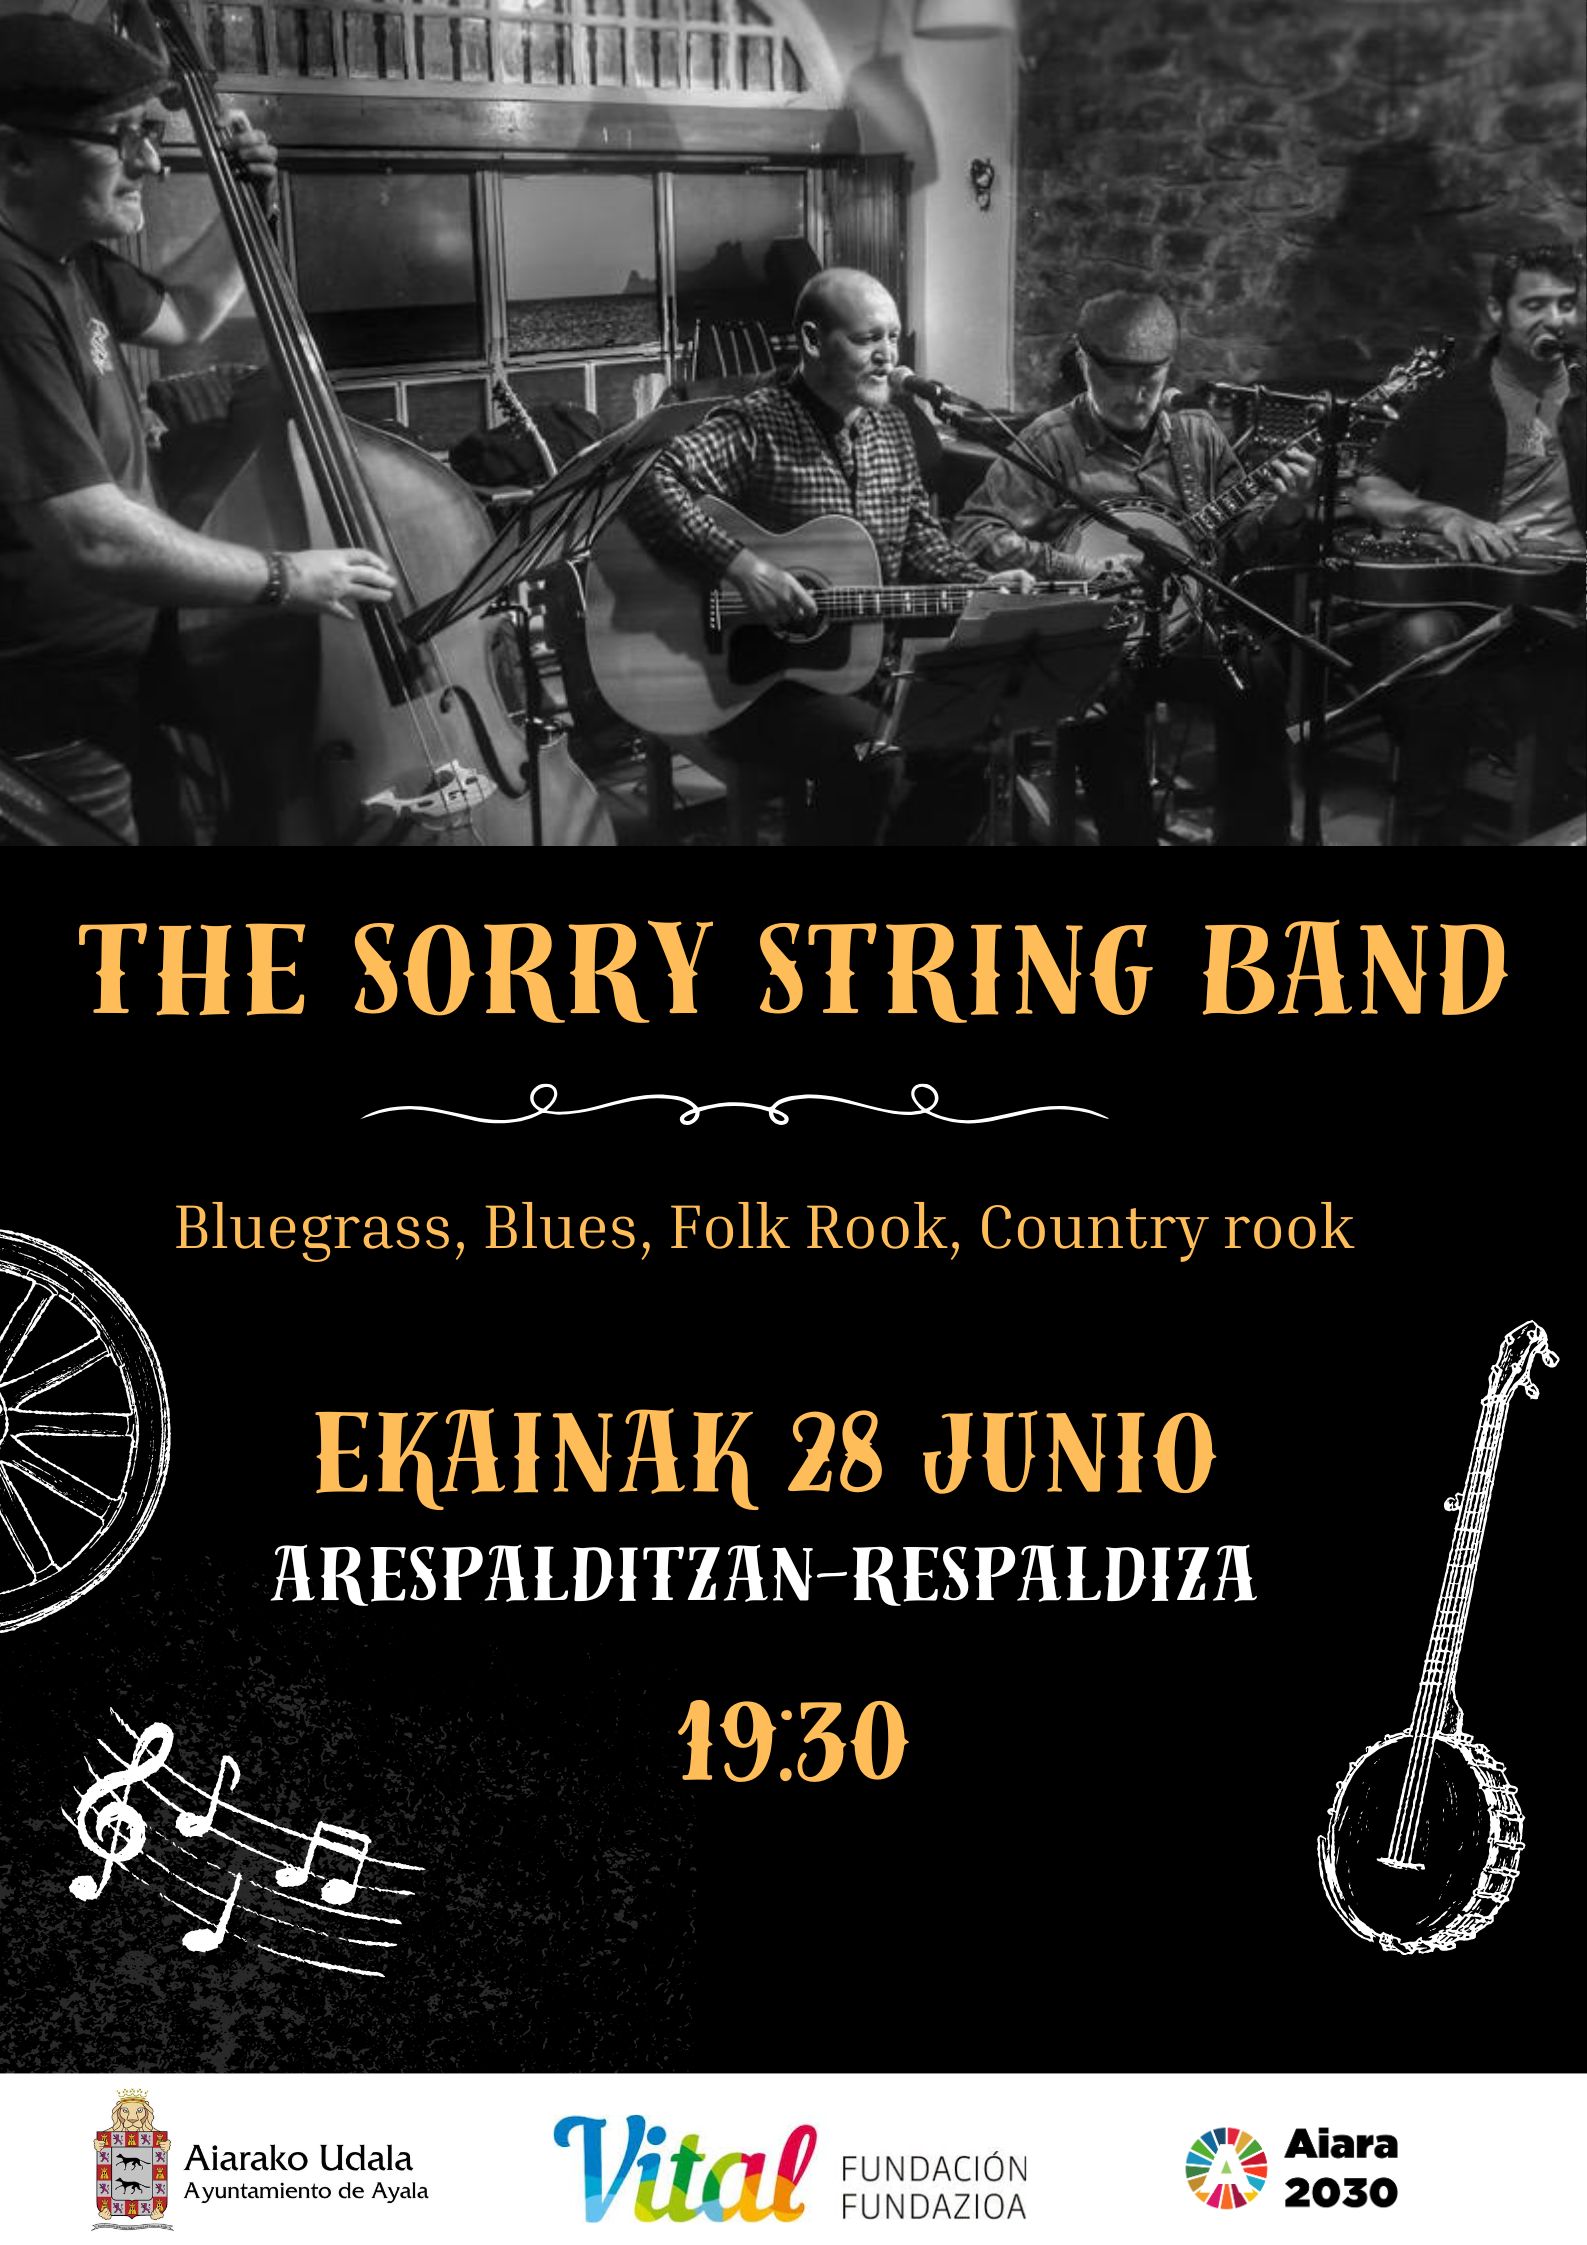 THE SORRY STRING BAND - 28 JUNIO - RESPALDIZA